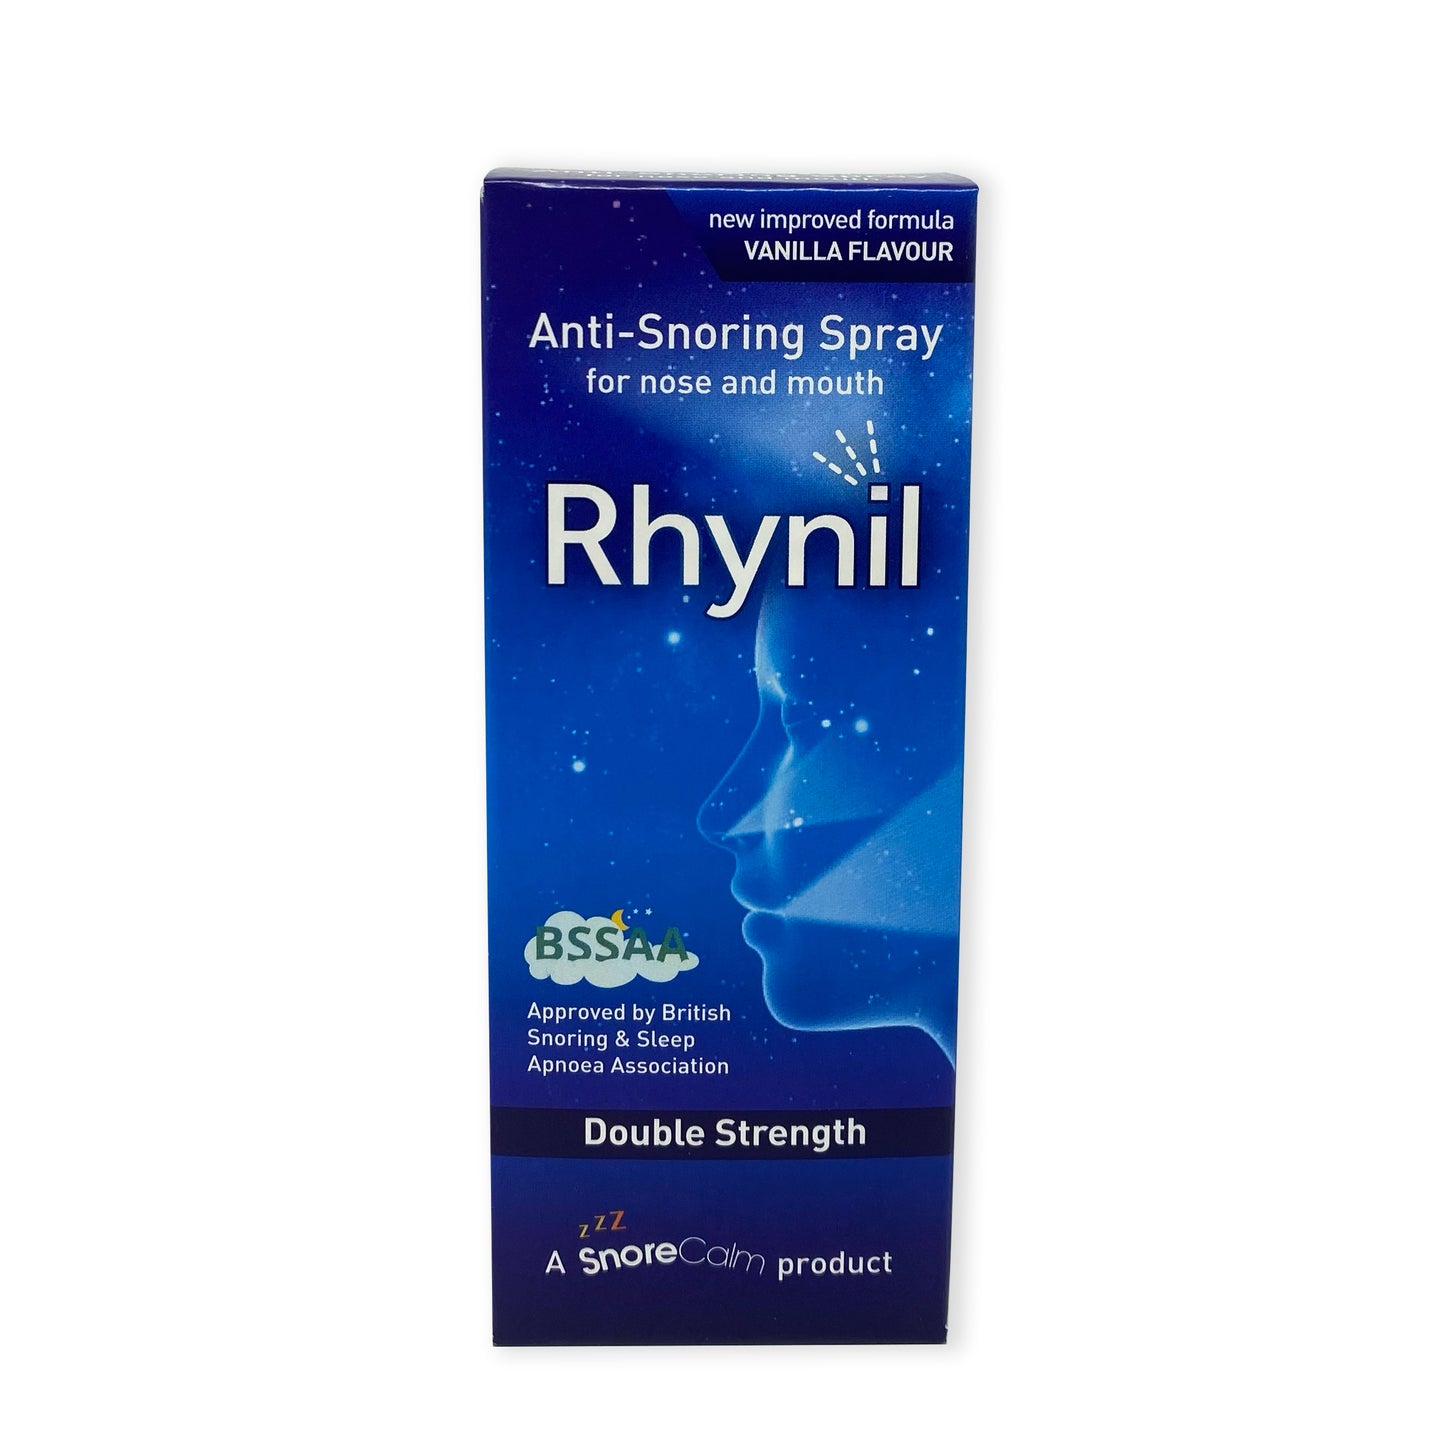 Rhynil Double Strength - Anti-snoring Spray for Nose and Mouth